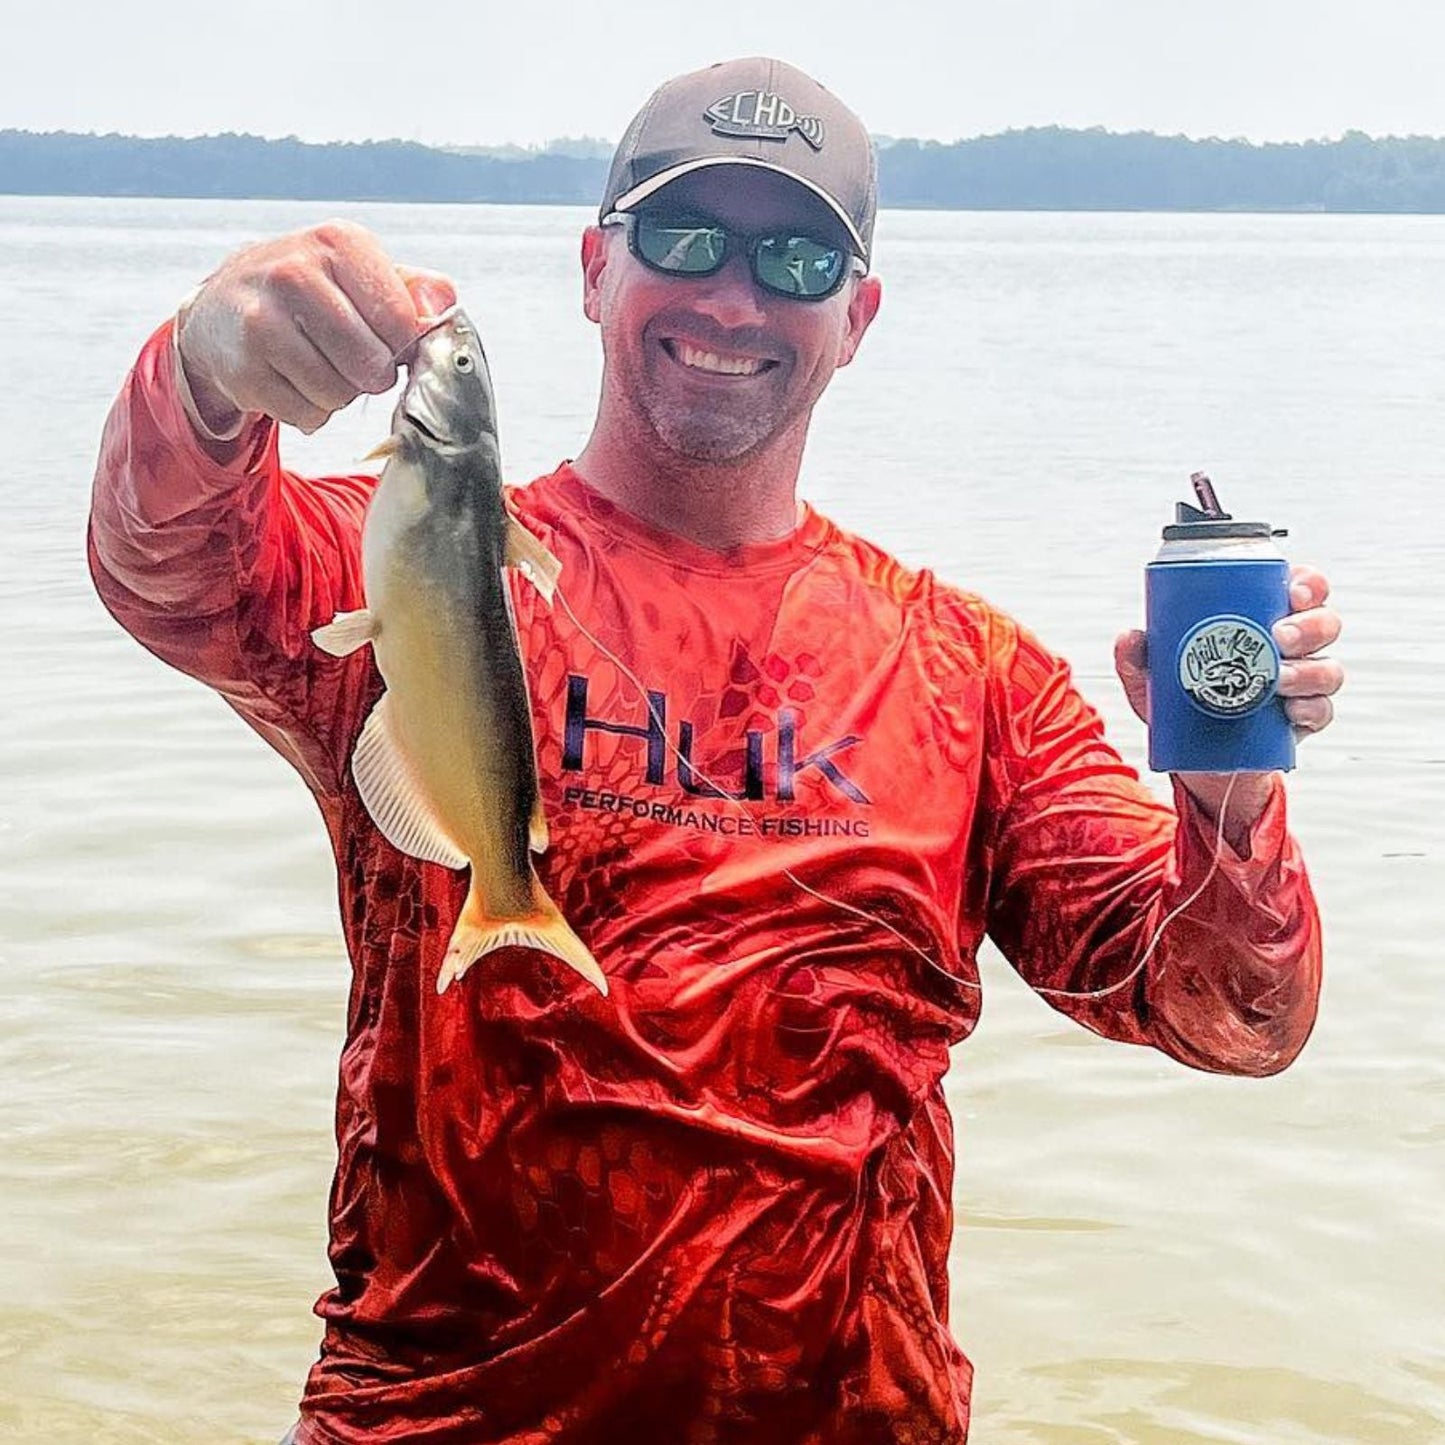 A man in a red fishing shirt and sunglasses holds up a fish he caught while standing in shallow water, smiling with an Original Chill-N-Reel from Chill-N-Reel in his other hand. The background showcases a lake with a tree-lined shore.